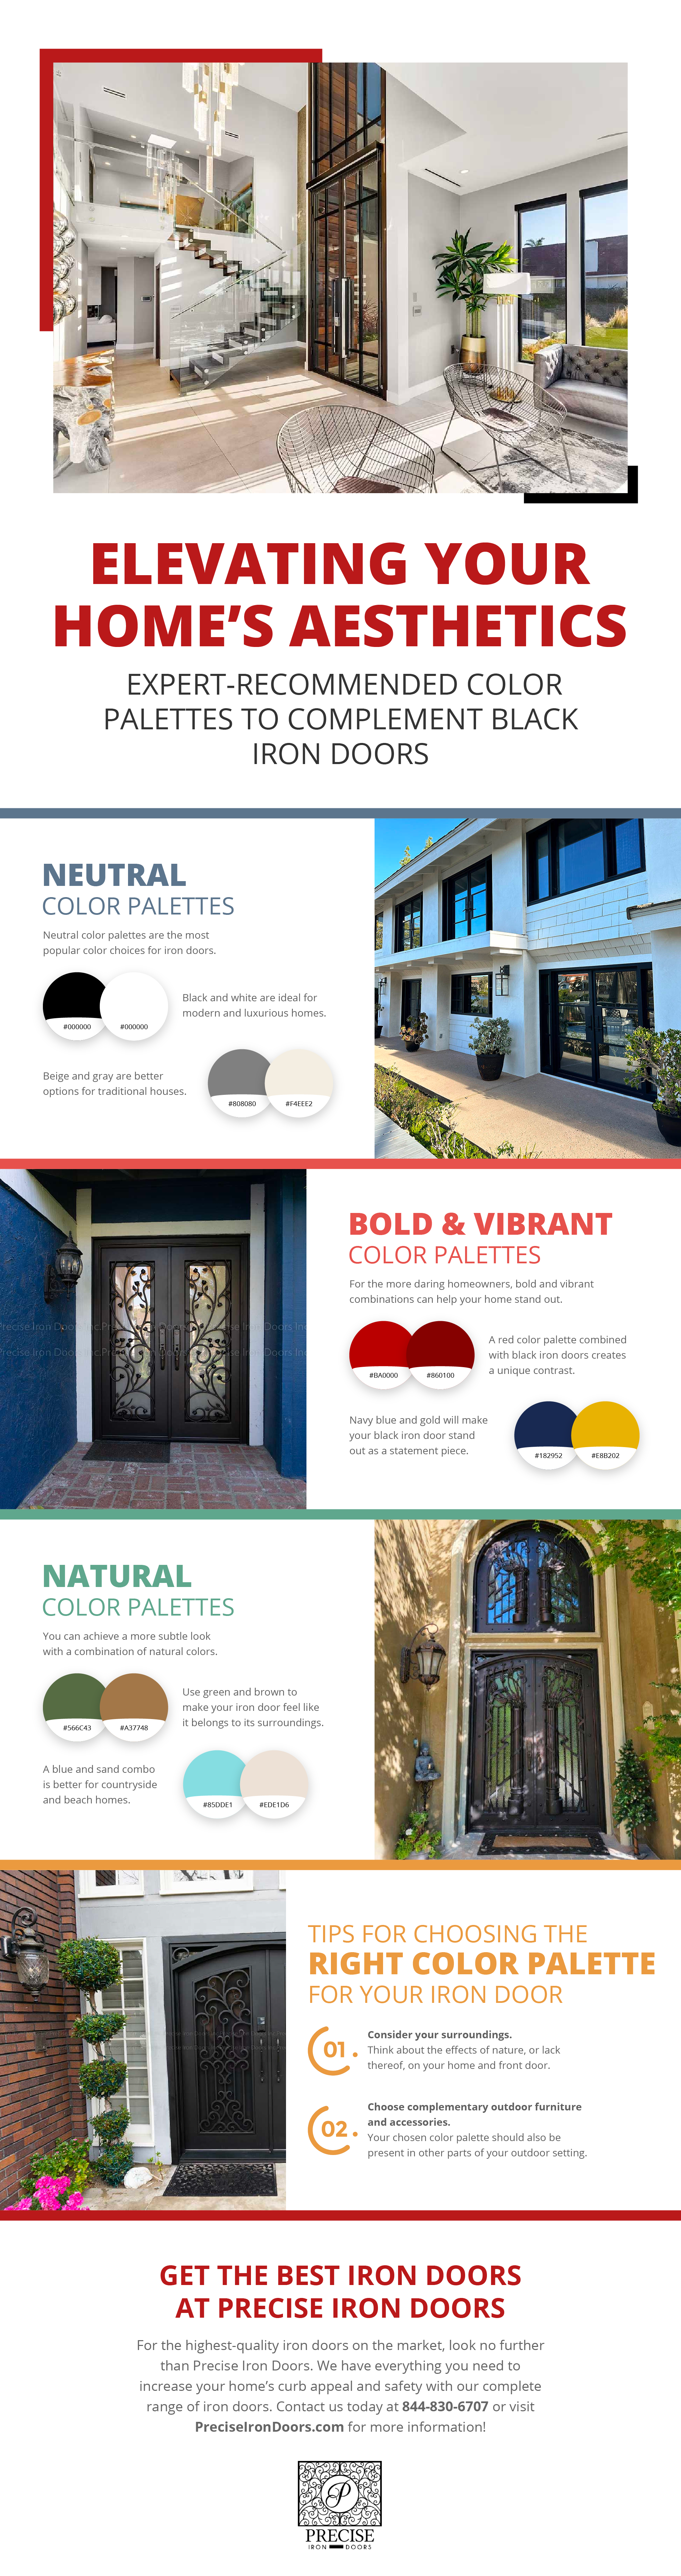 Elevating Your Home's Aesthetics With Iron Doors Infographic